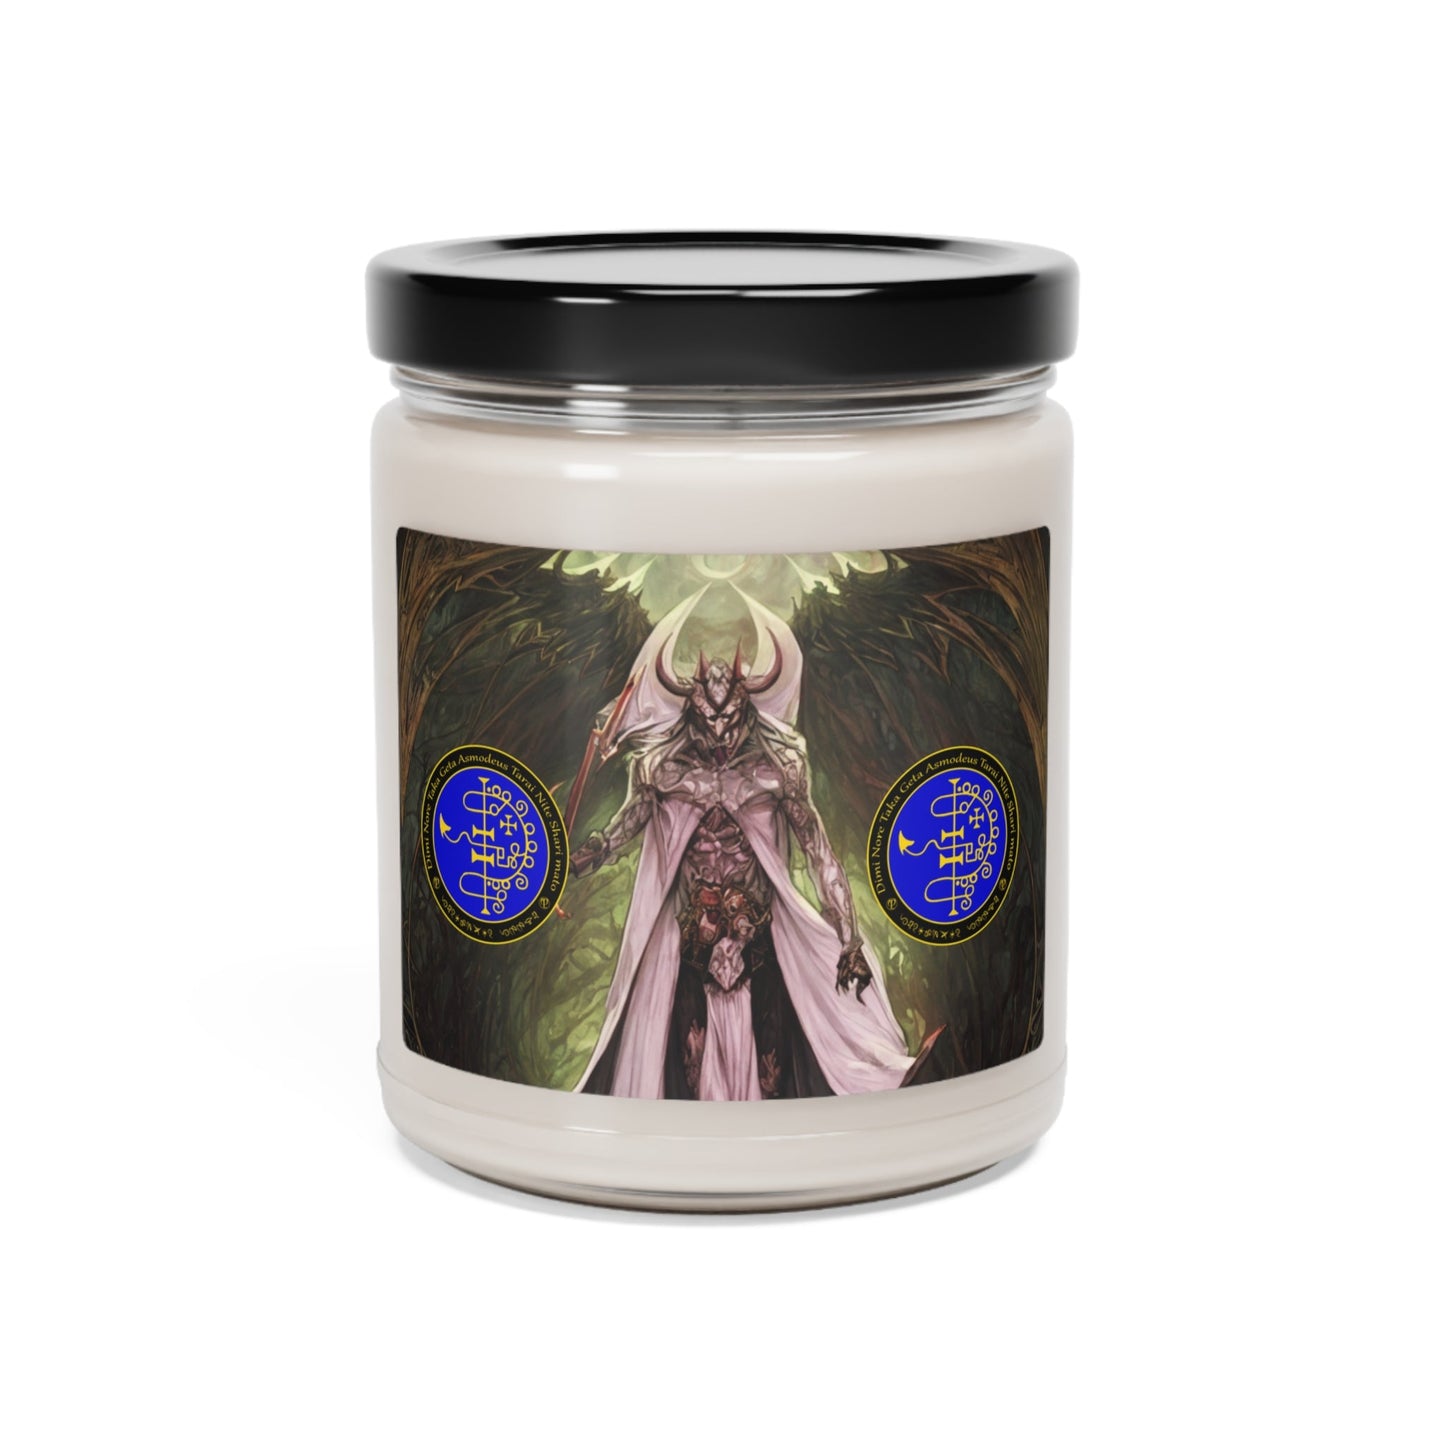 Demon-Asmodeus-oltar-Soy-Scented-Soy Candle-for-Gamble-related-offerings-rituals-inicijations-or-praying-and-meditation-11